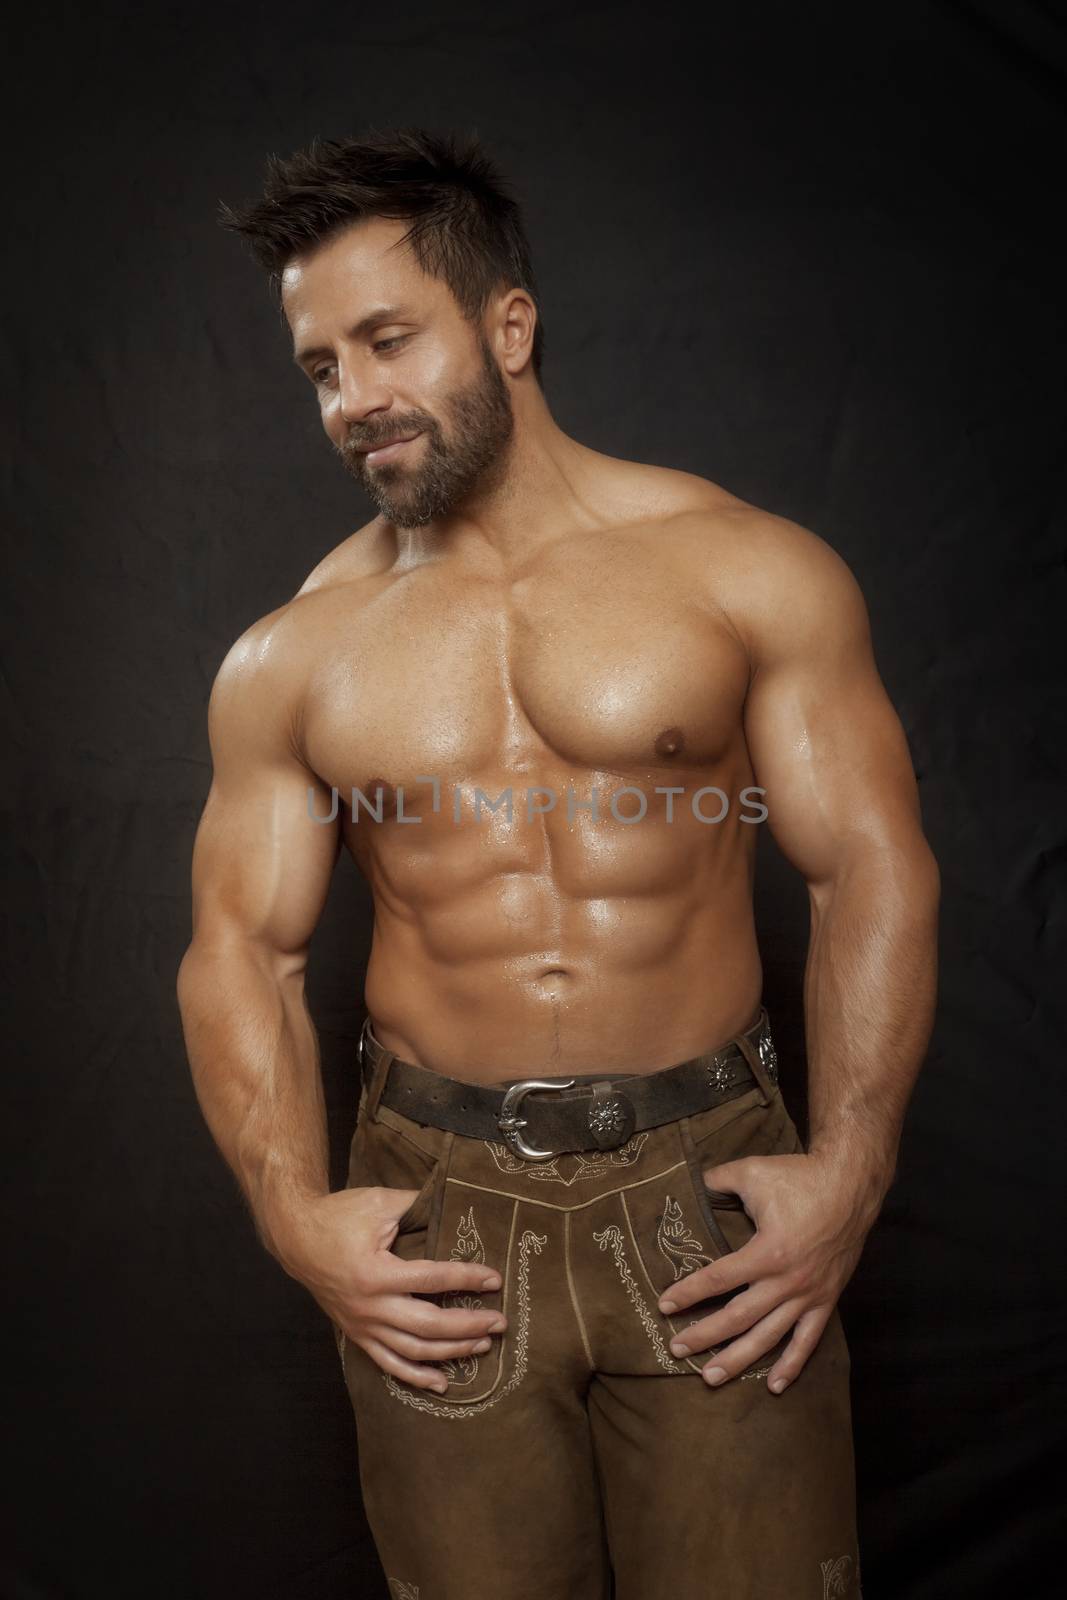 An image of a traditional bavarian muscle man